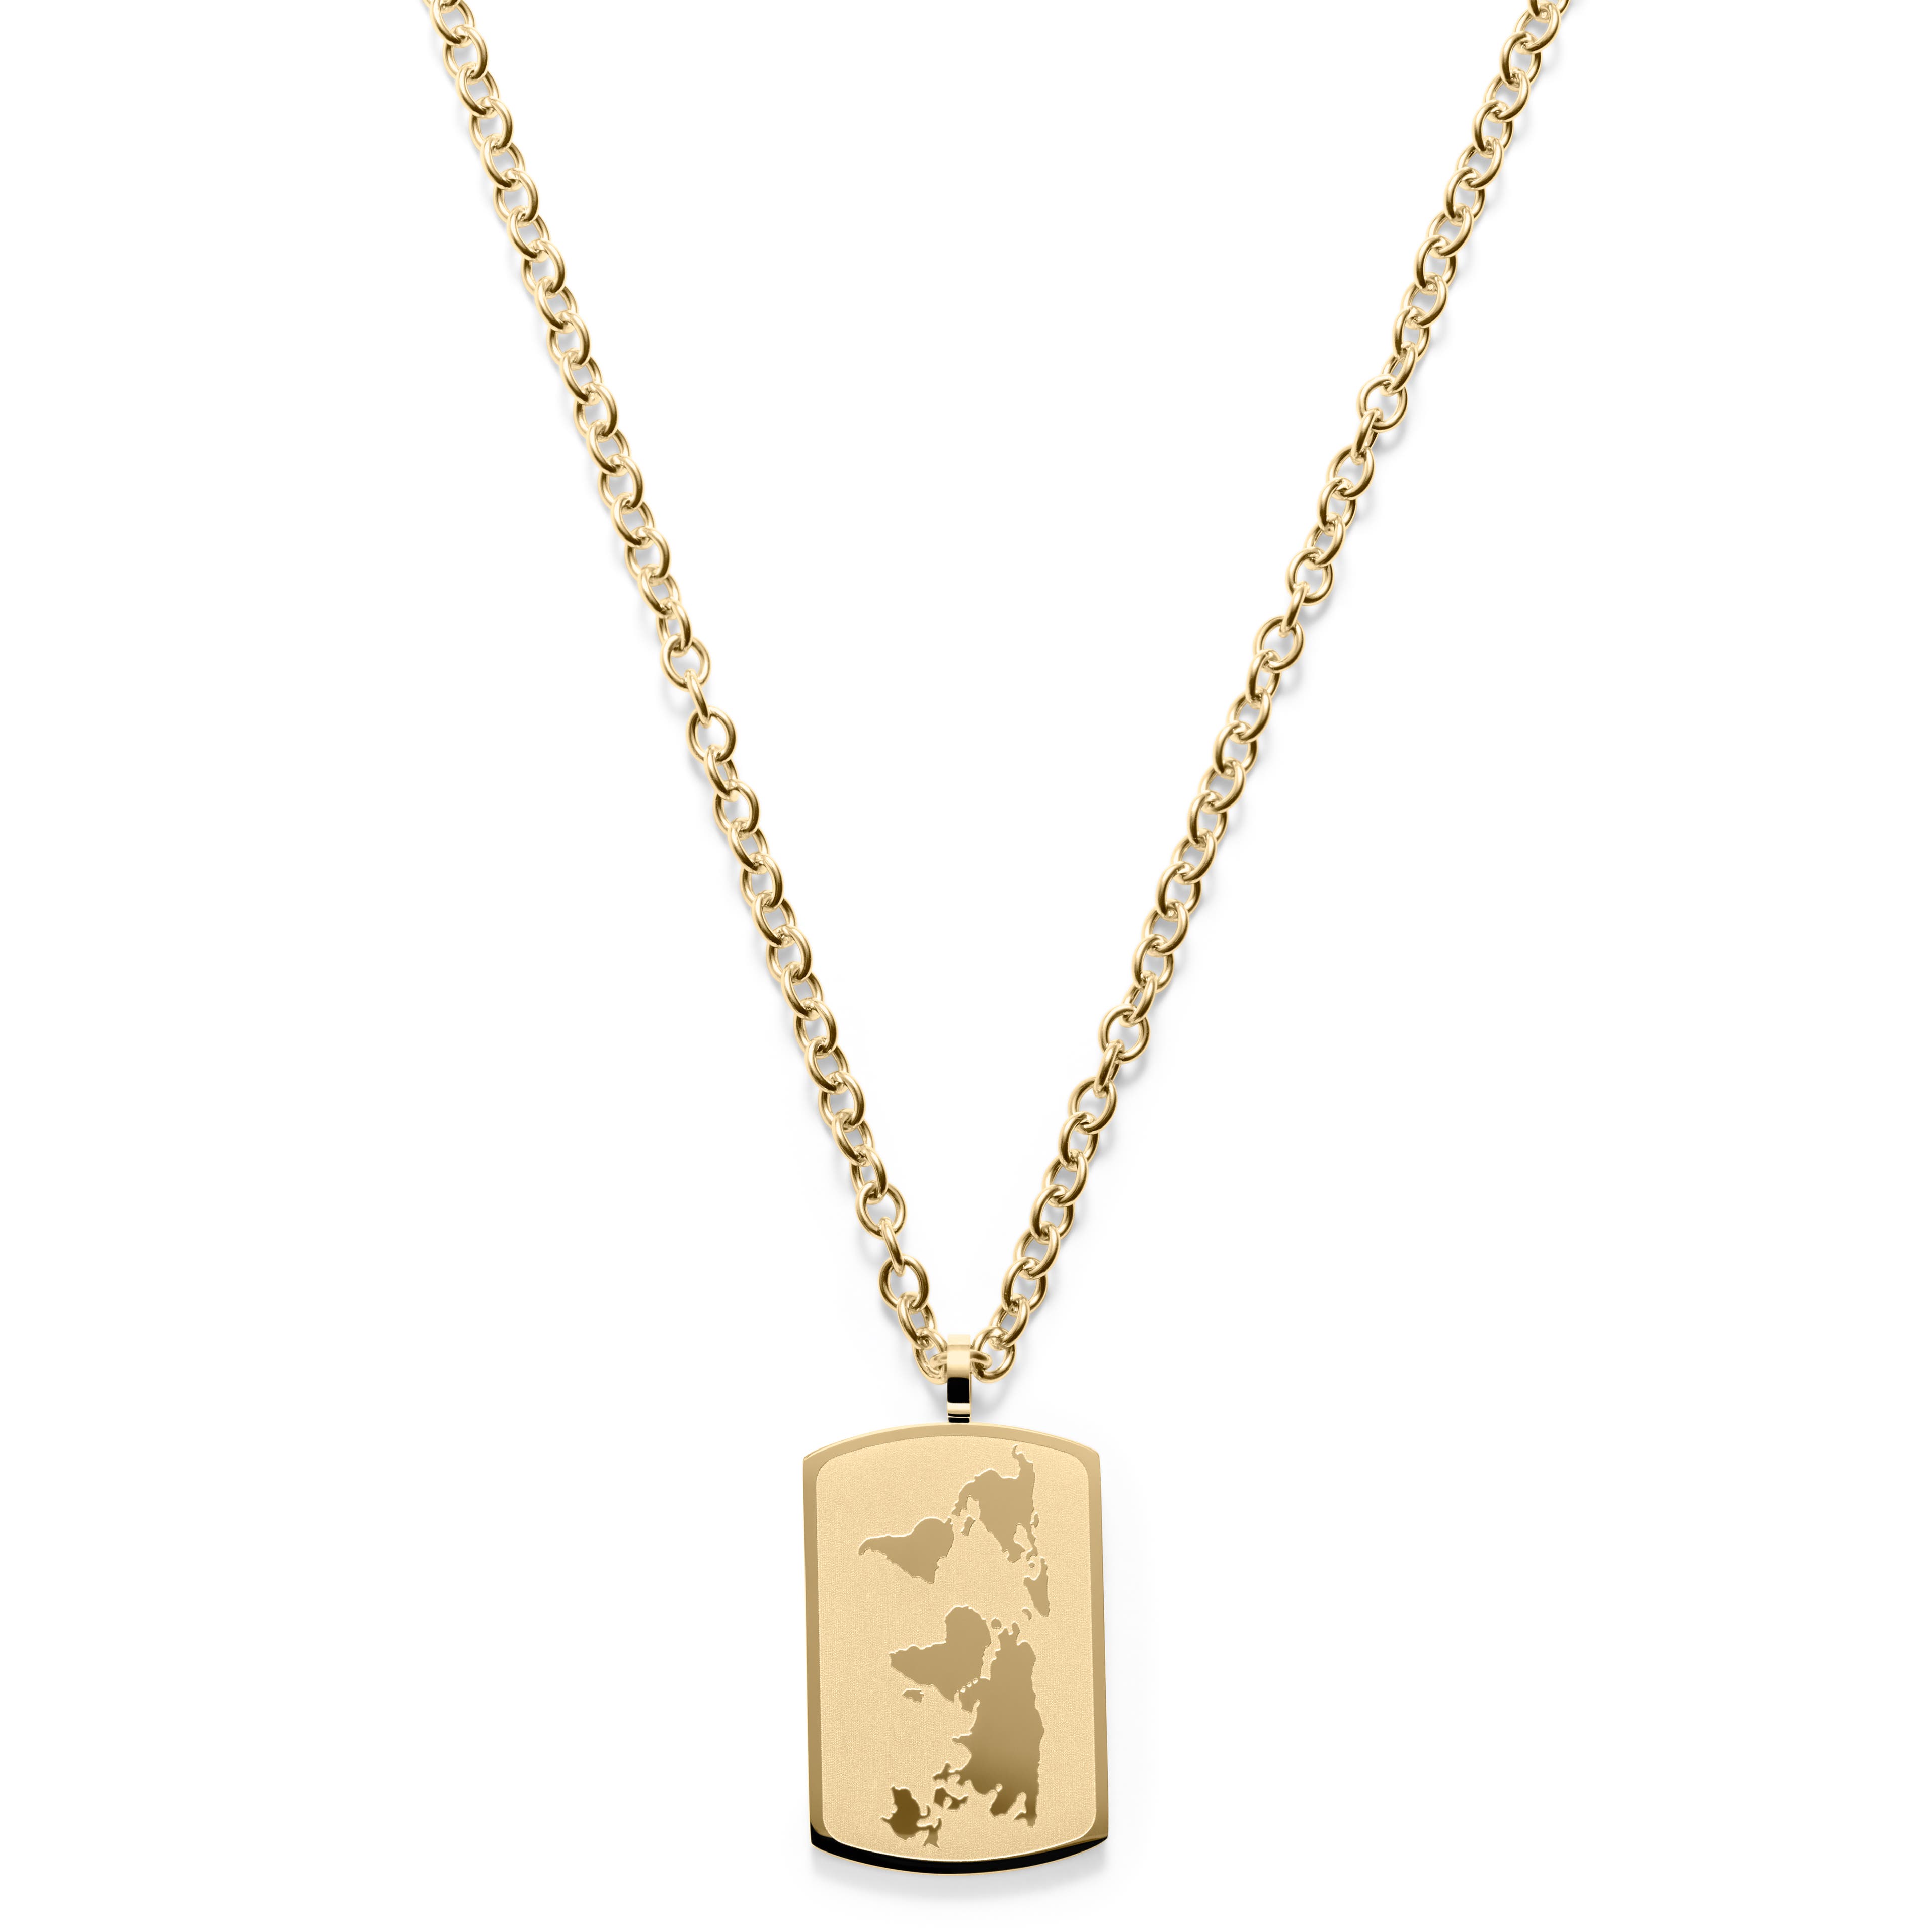 Gold-Tone World Map Cable Chain Necklace